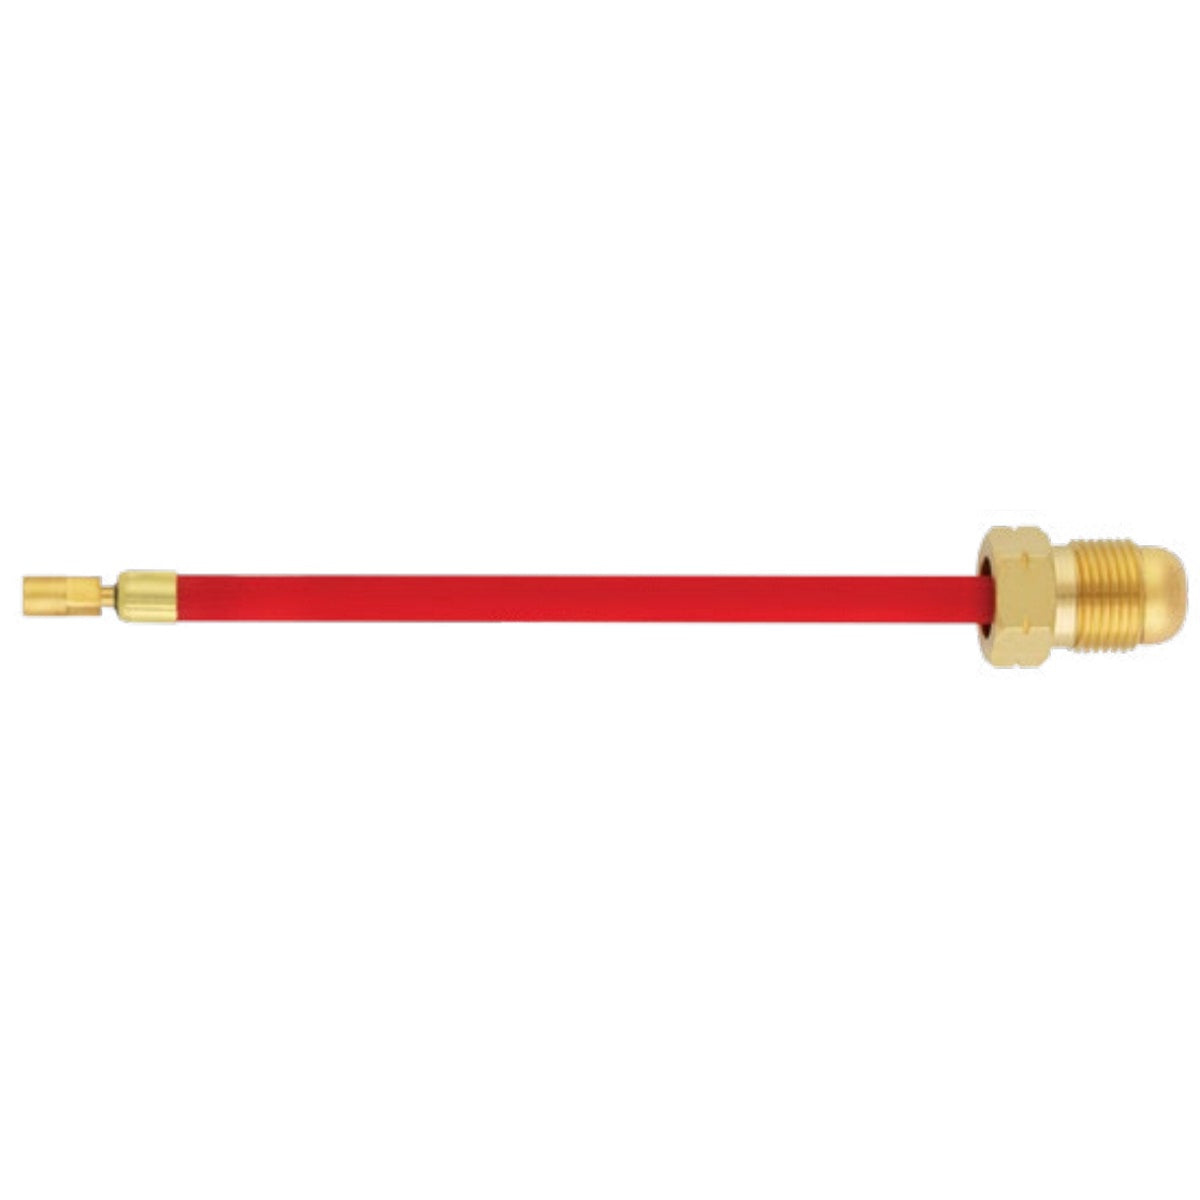 CK Worldwide 20 Series Superflex TIG Torch Power Cable (2XXPCSF)